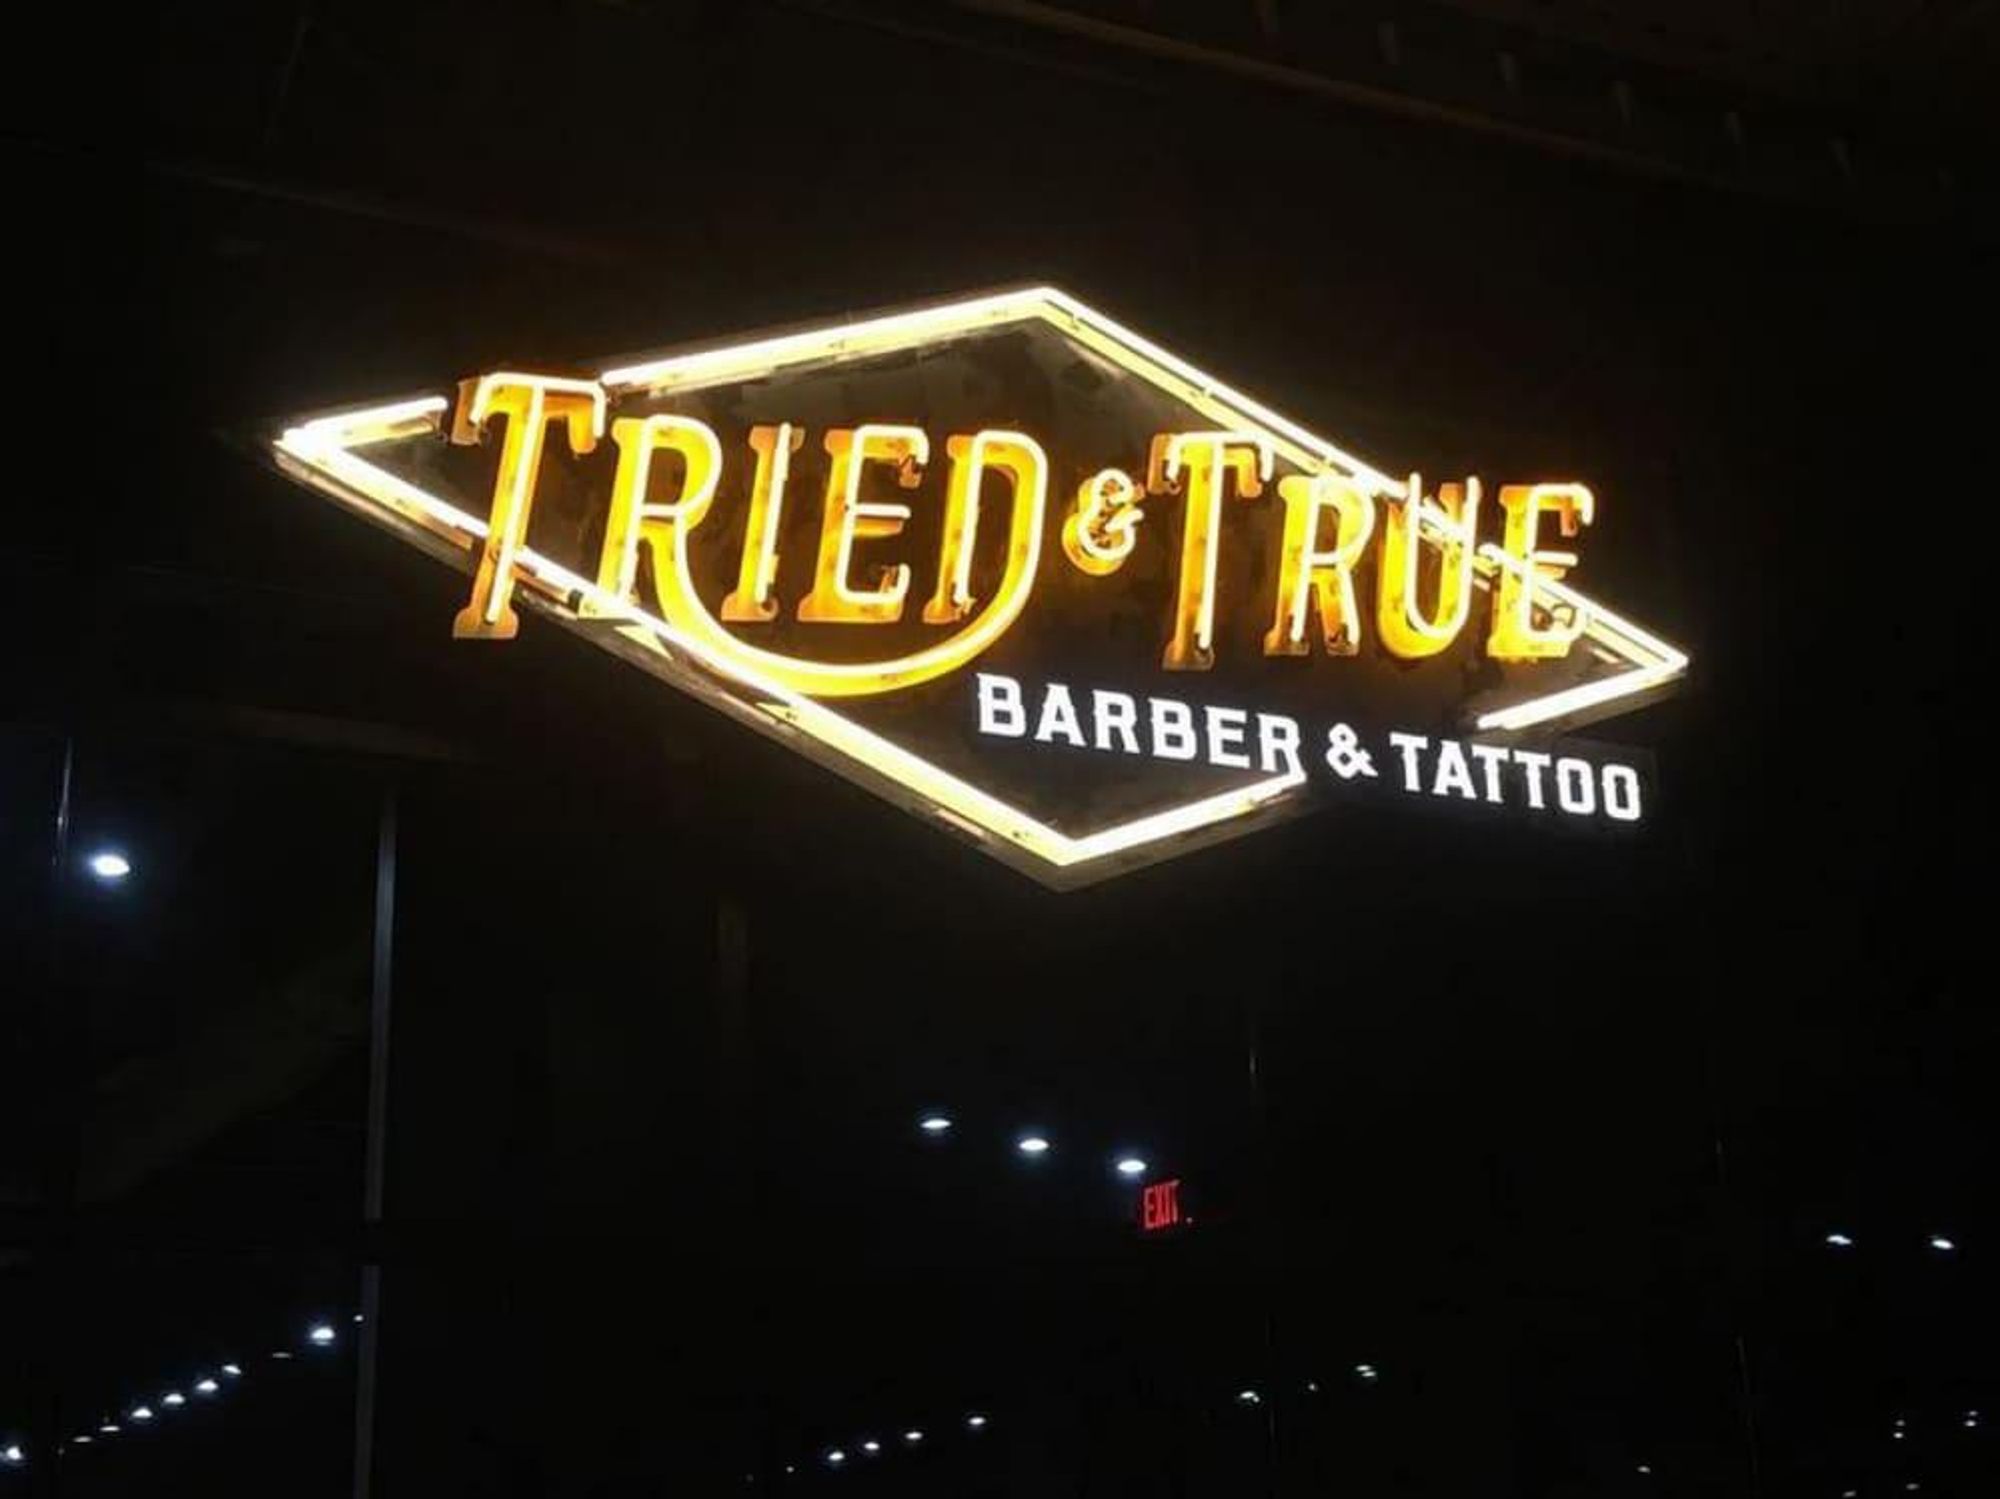 Tried and True Barber and Tattoo sign